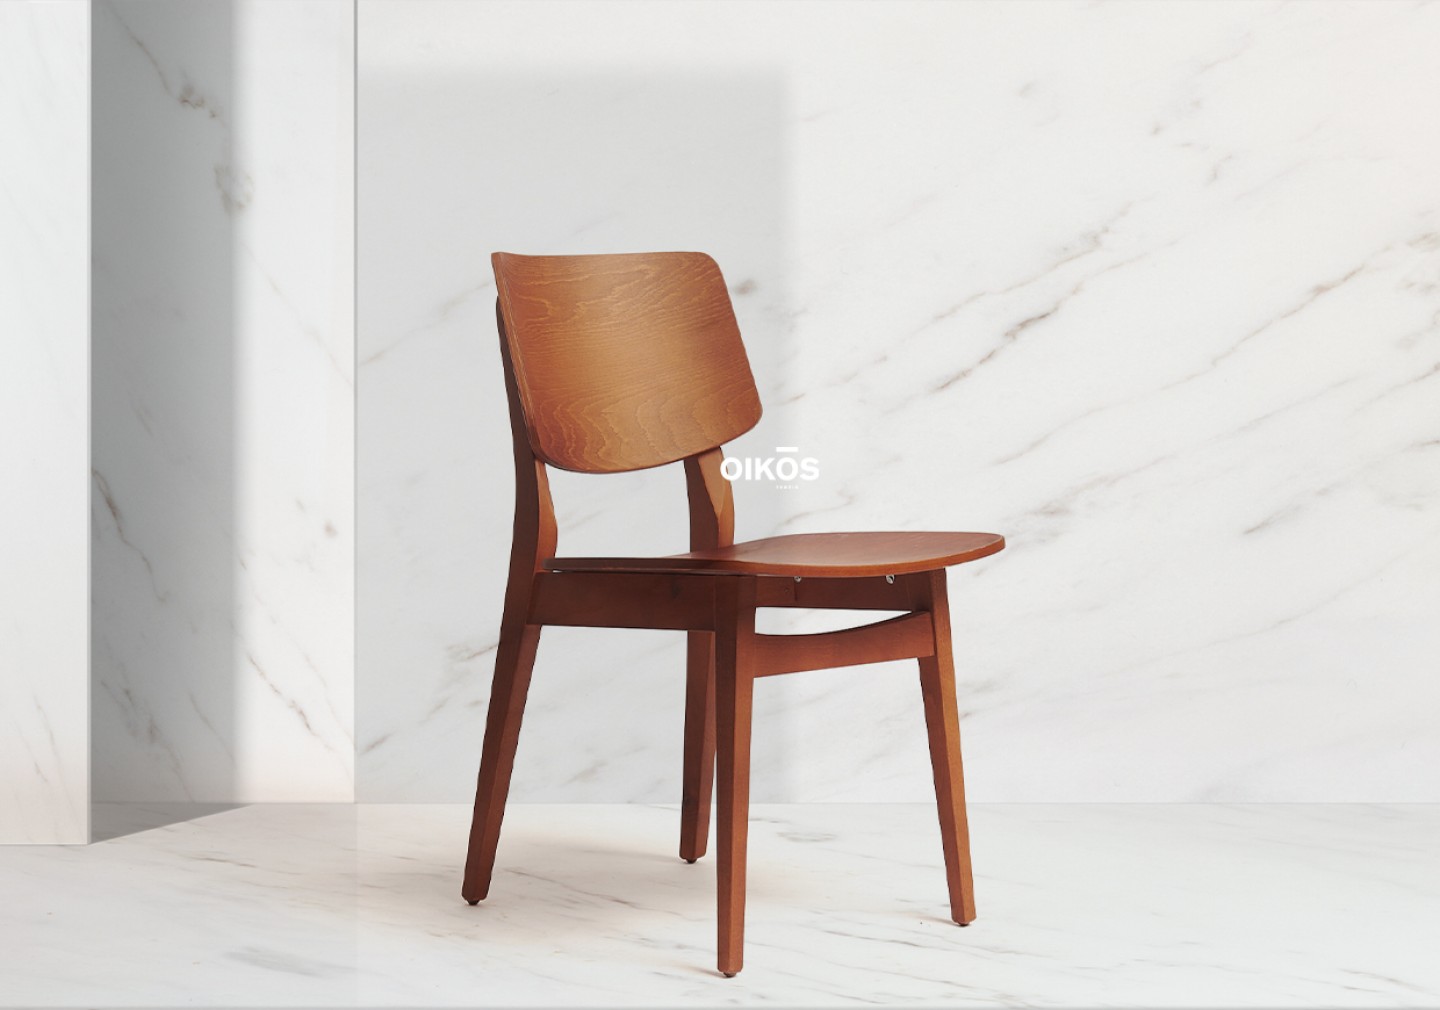 THE ELLIS DINING CHAIR